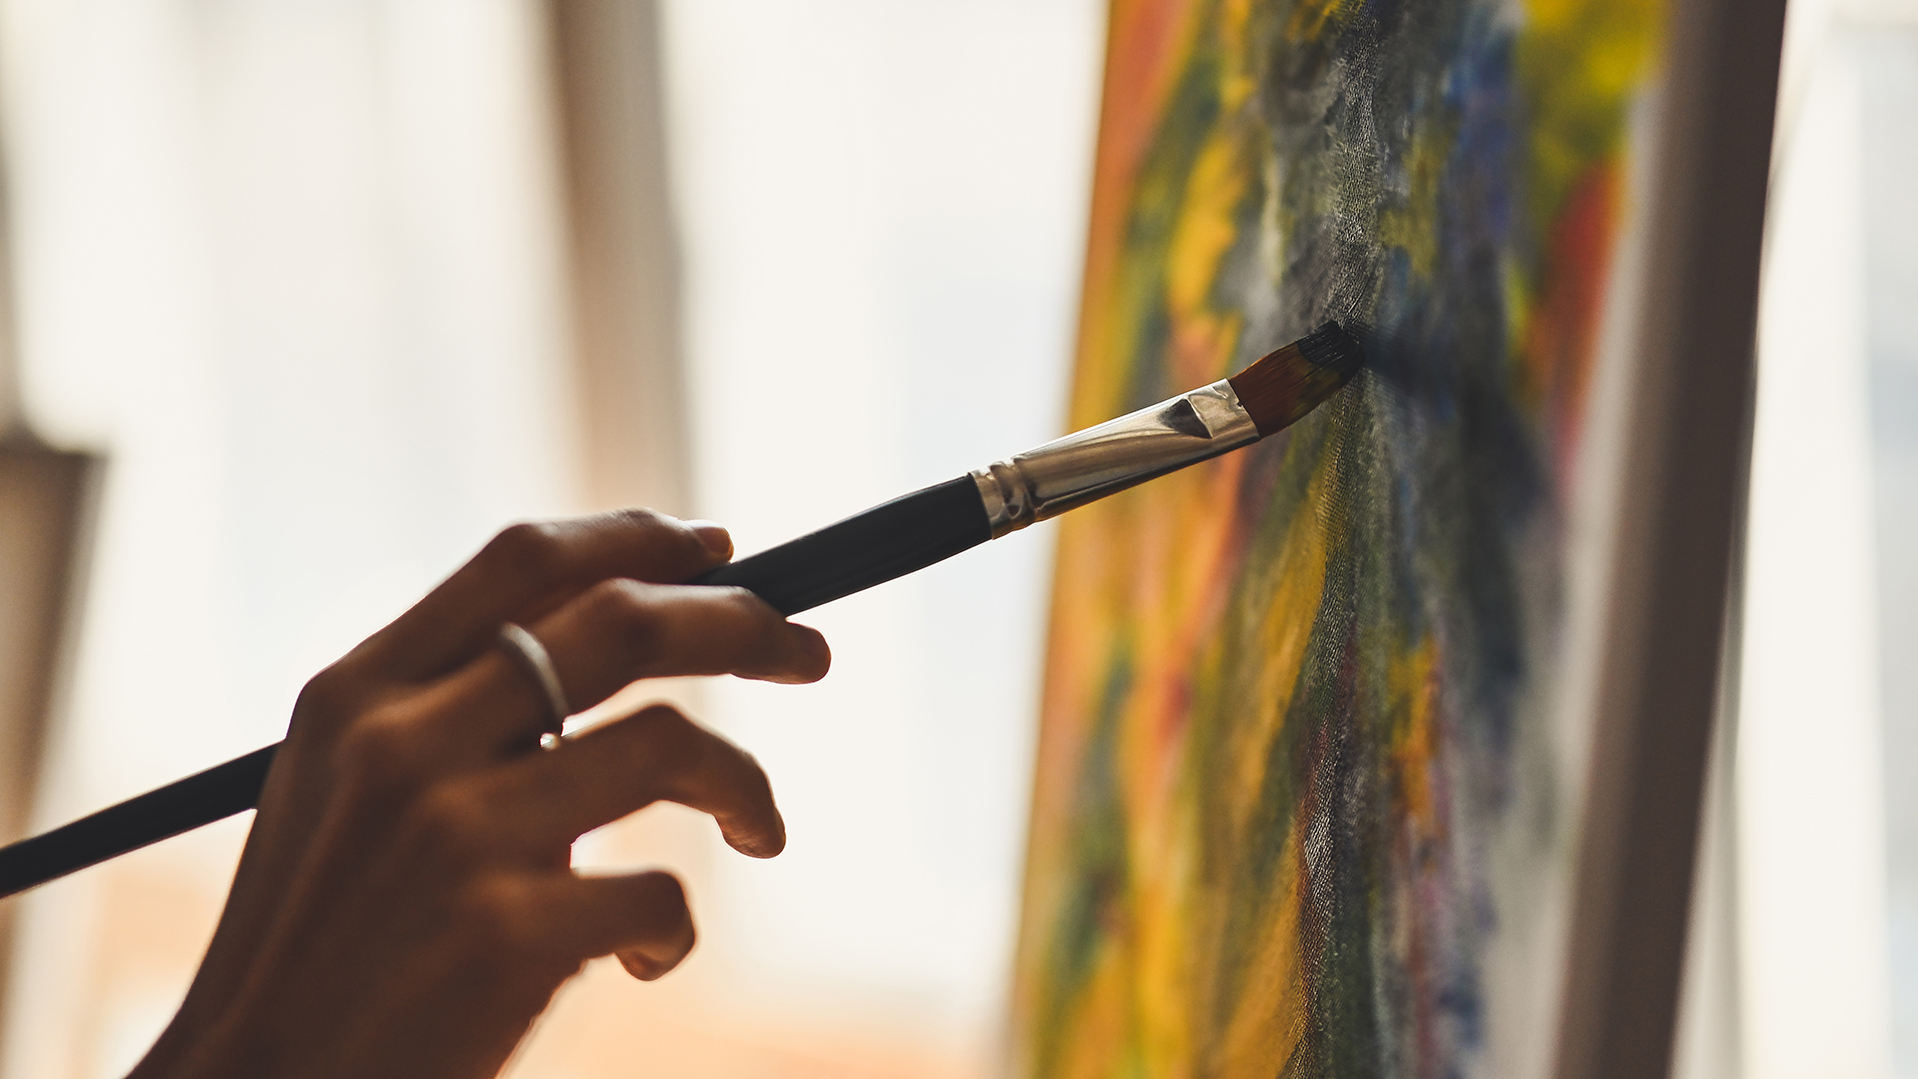 An up close view of a person holding a paintbrush and painting on a canvas.